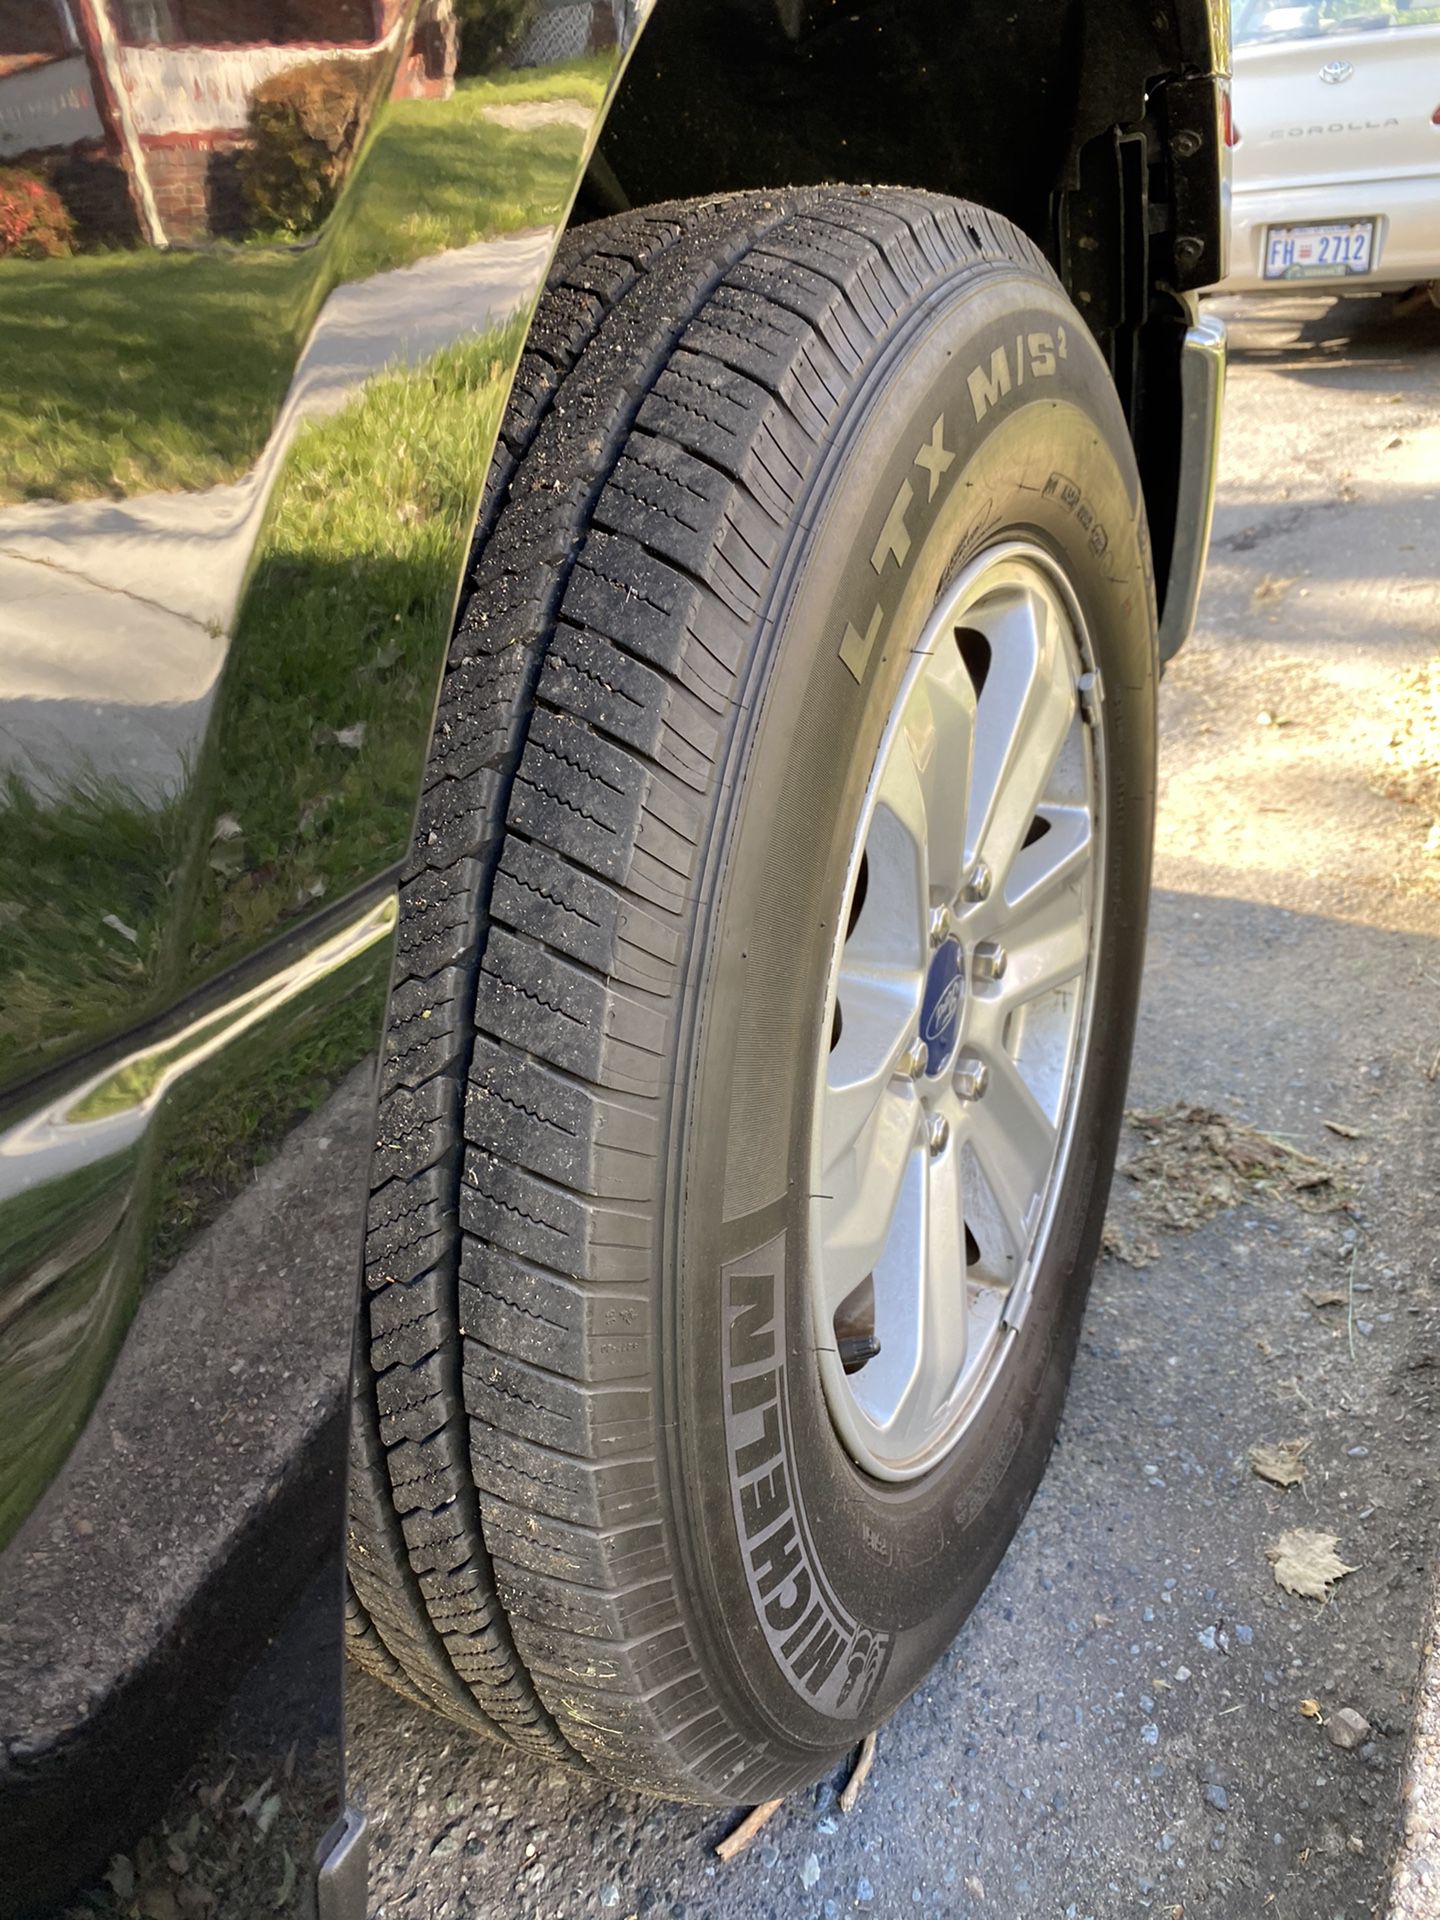 Almost NEW Michelin Truck Tires